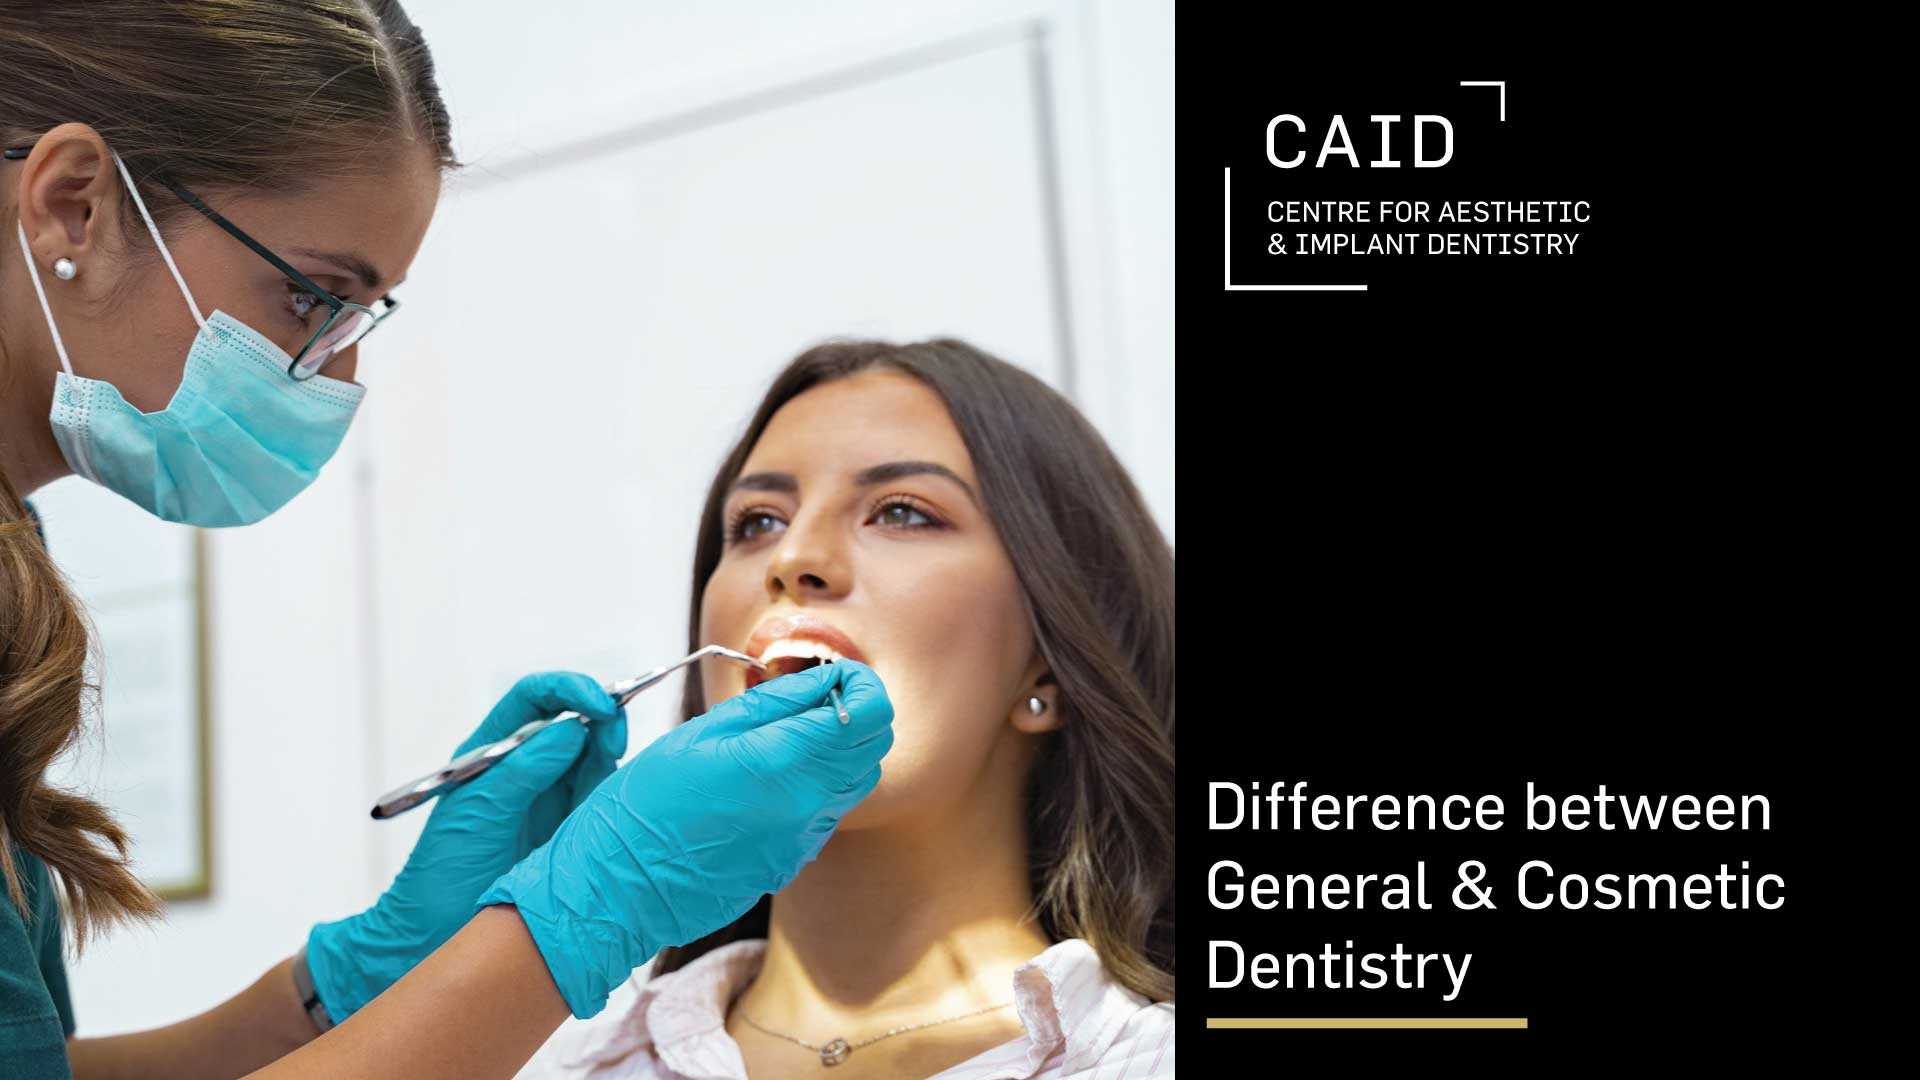 What's the difference between General Dentistry and Cosmetic Dentistry?